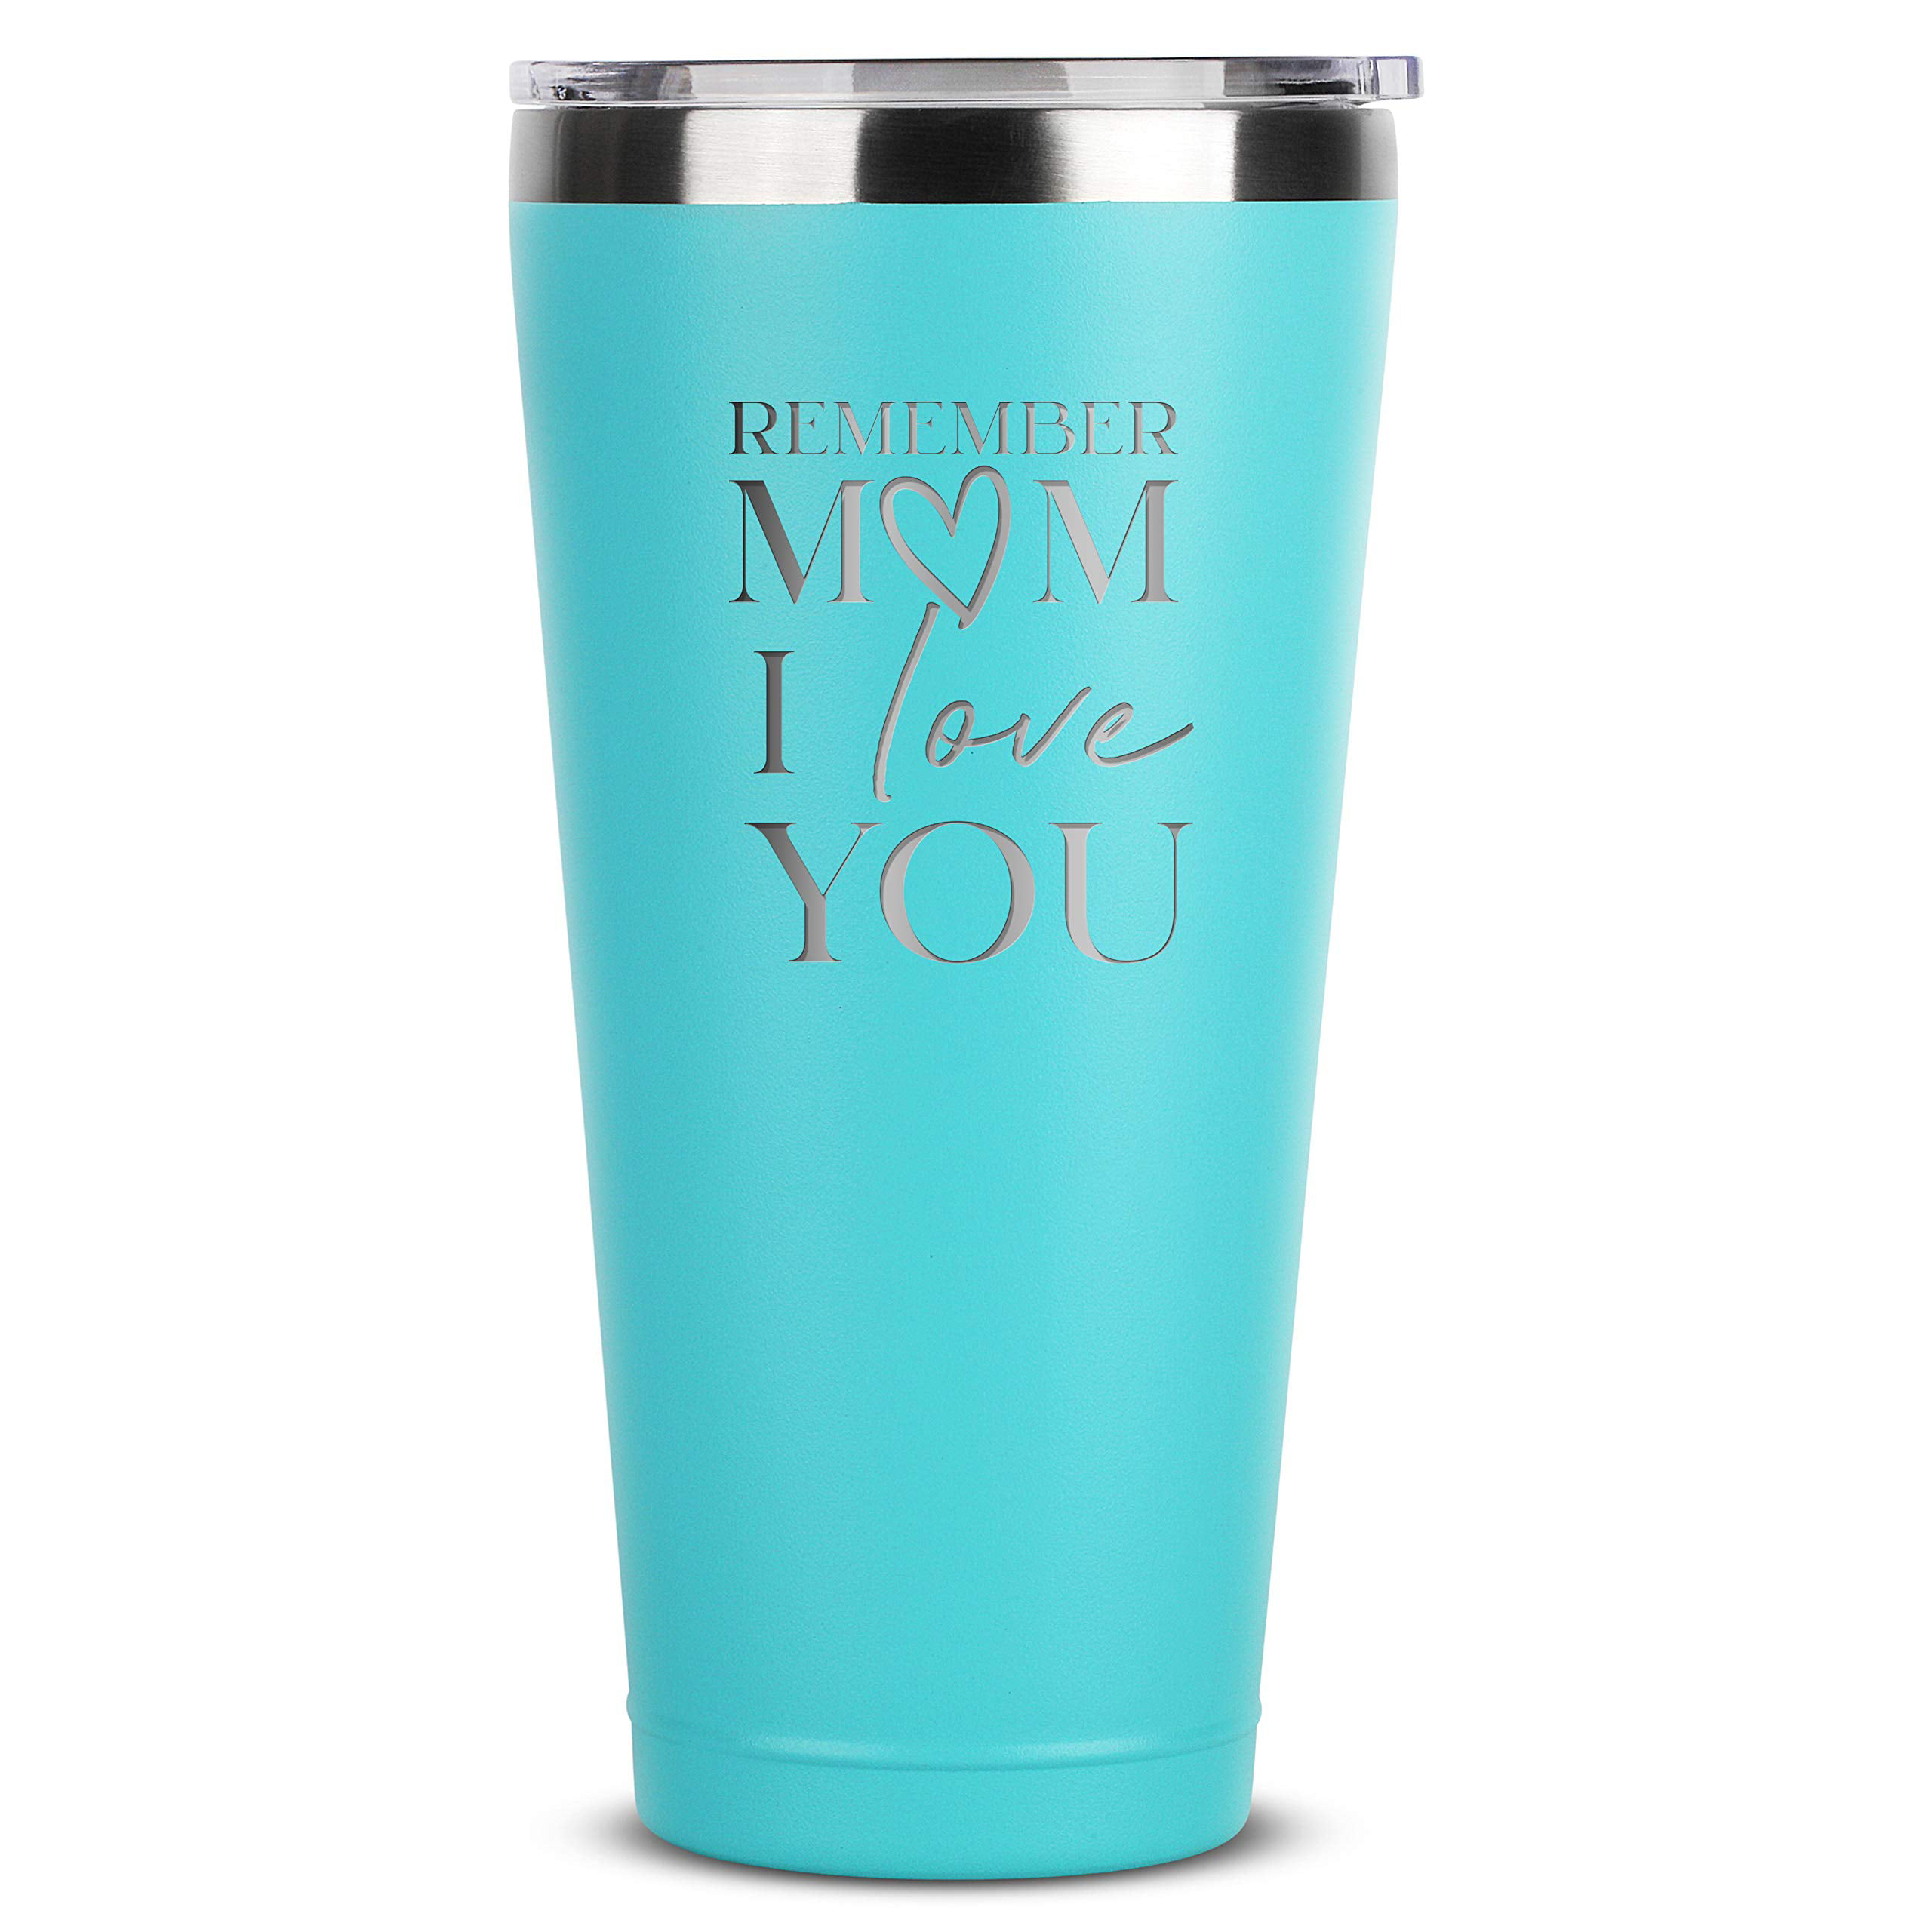 Mom Coffee Tumbler Mother's Day Gift Gift for Her Personalized Engraved Stainless Steel Insulated Mom Tumbler